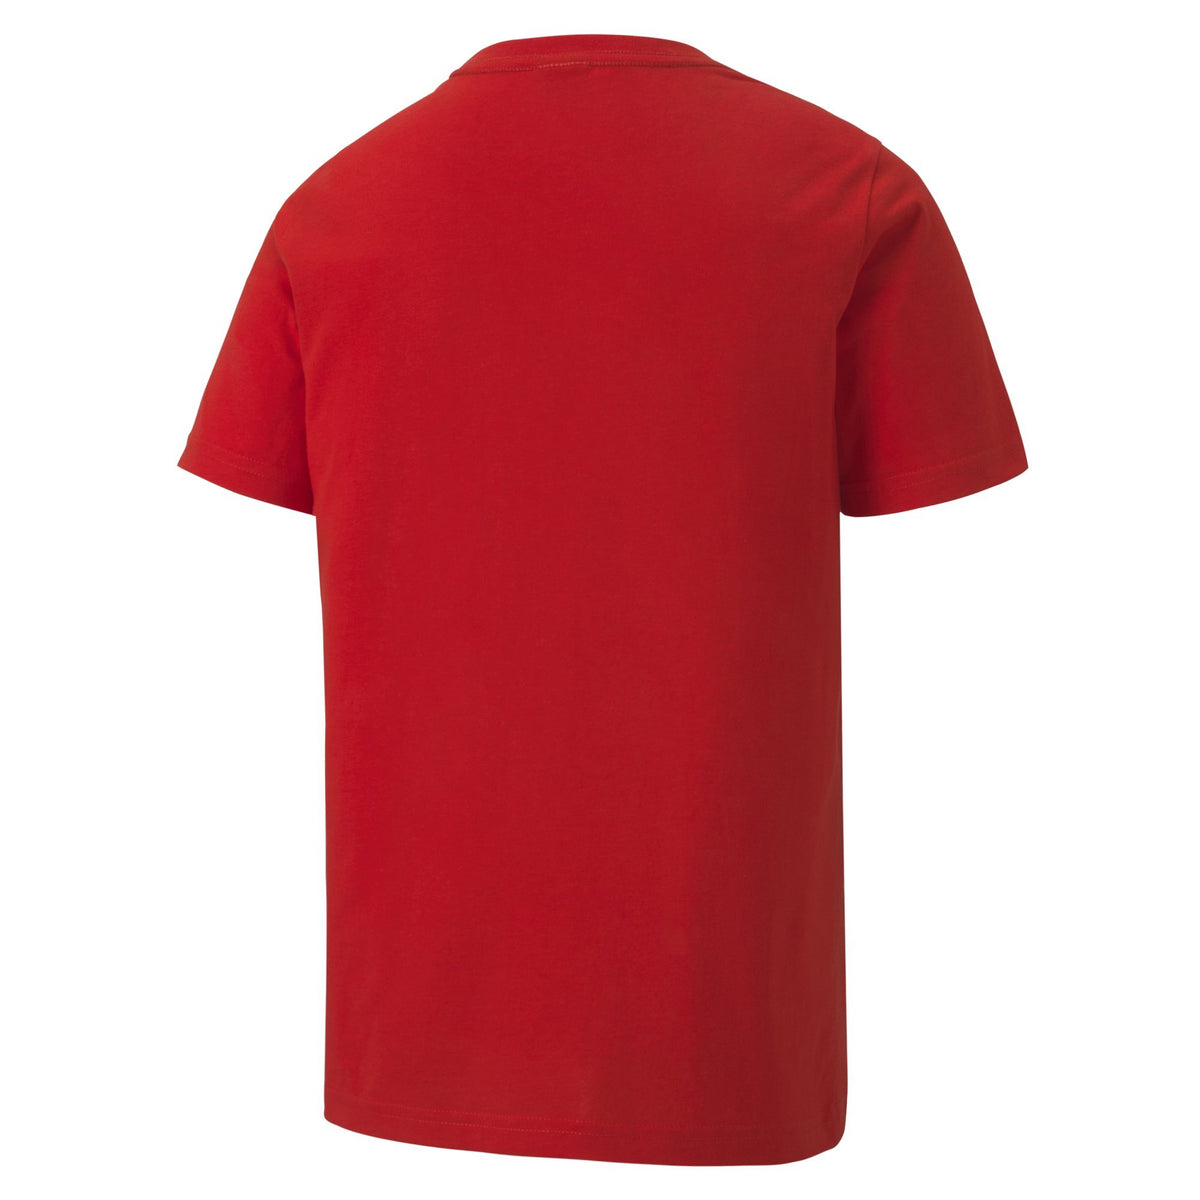 Puma TeamGOAL 23 Casuals Tee Jr - Red